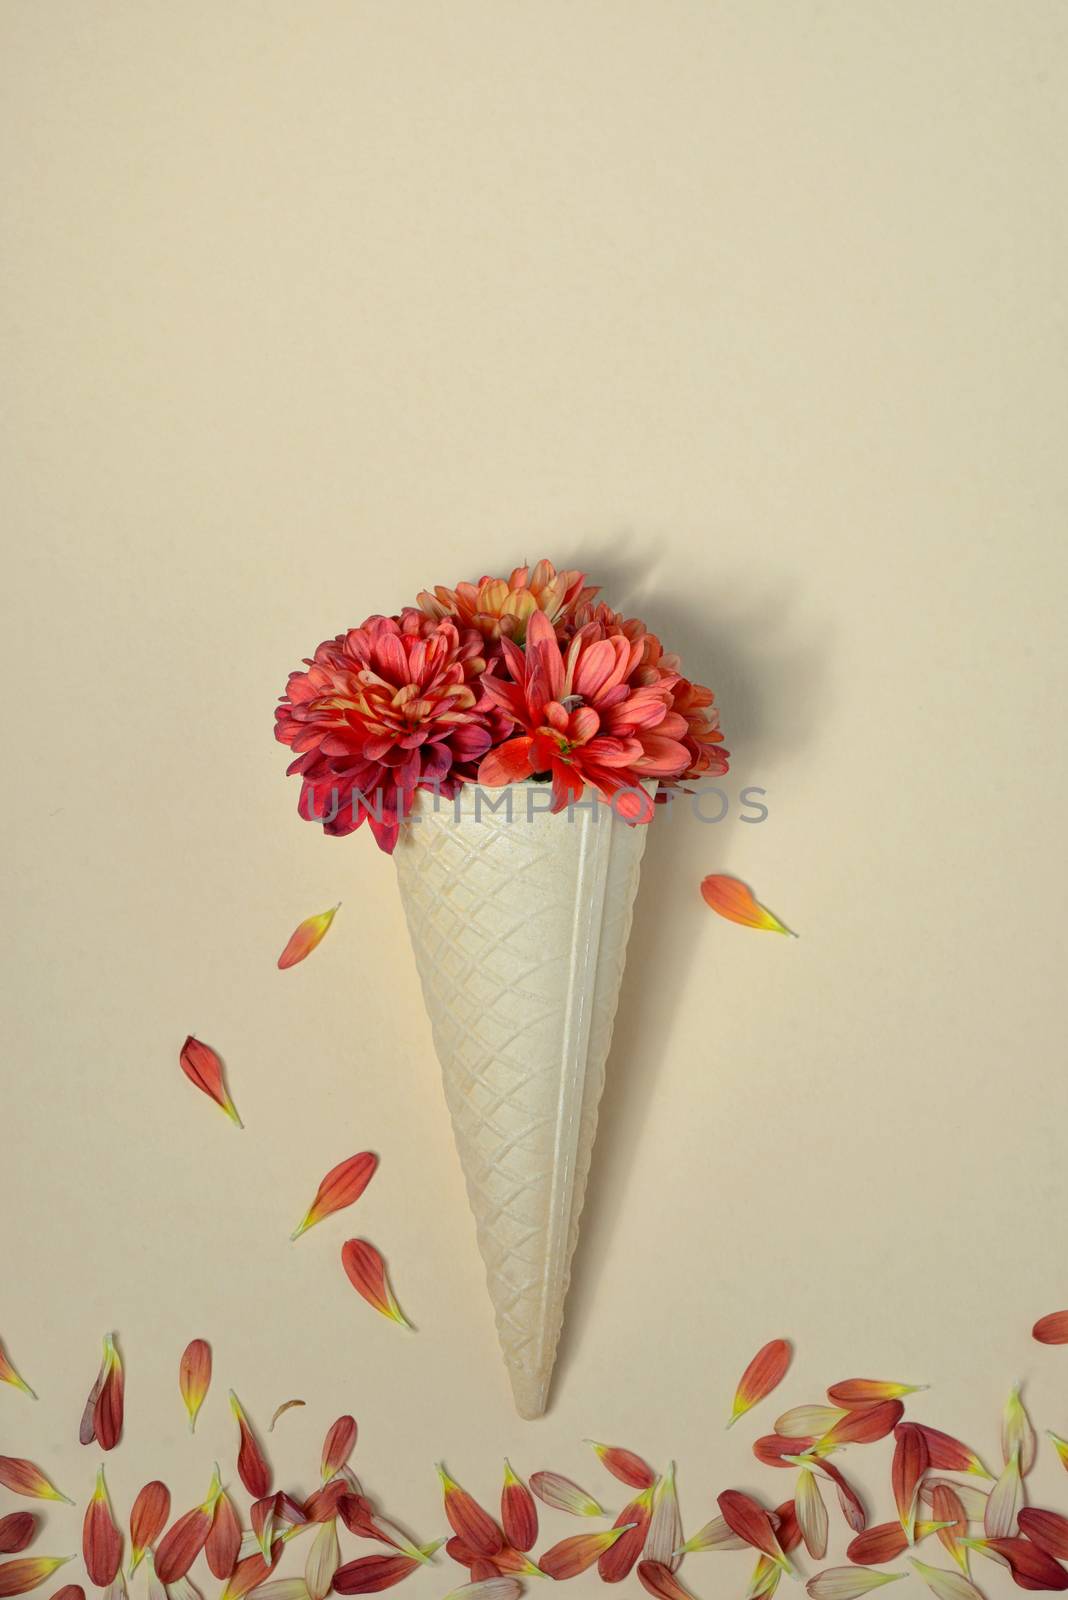 Autumn flowers in ice cream cone on paper background